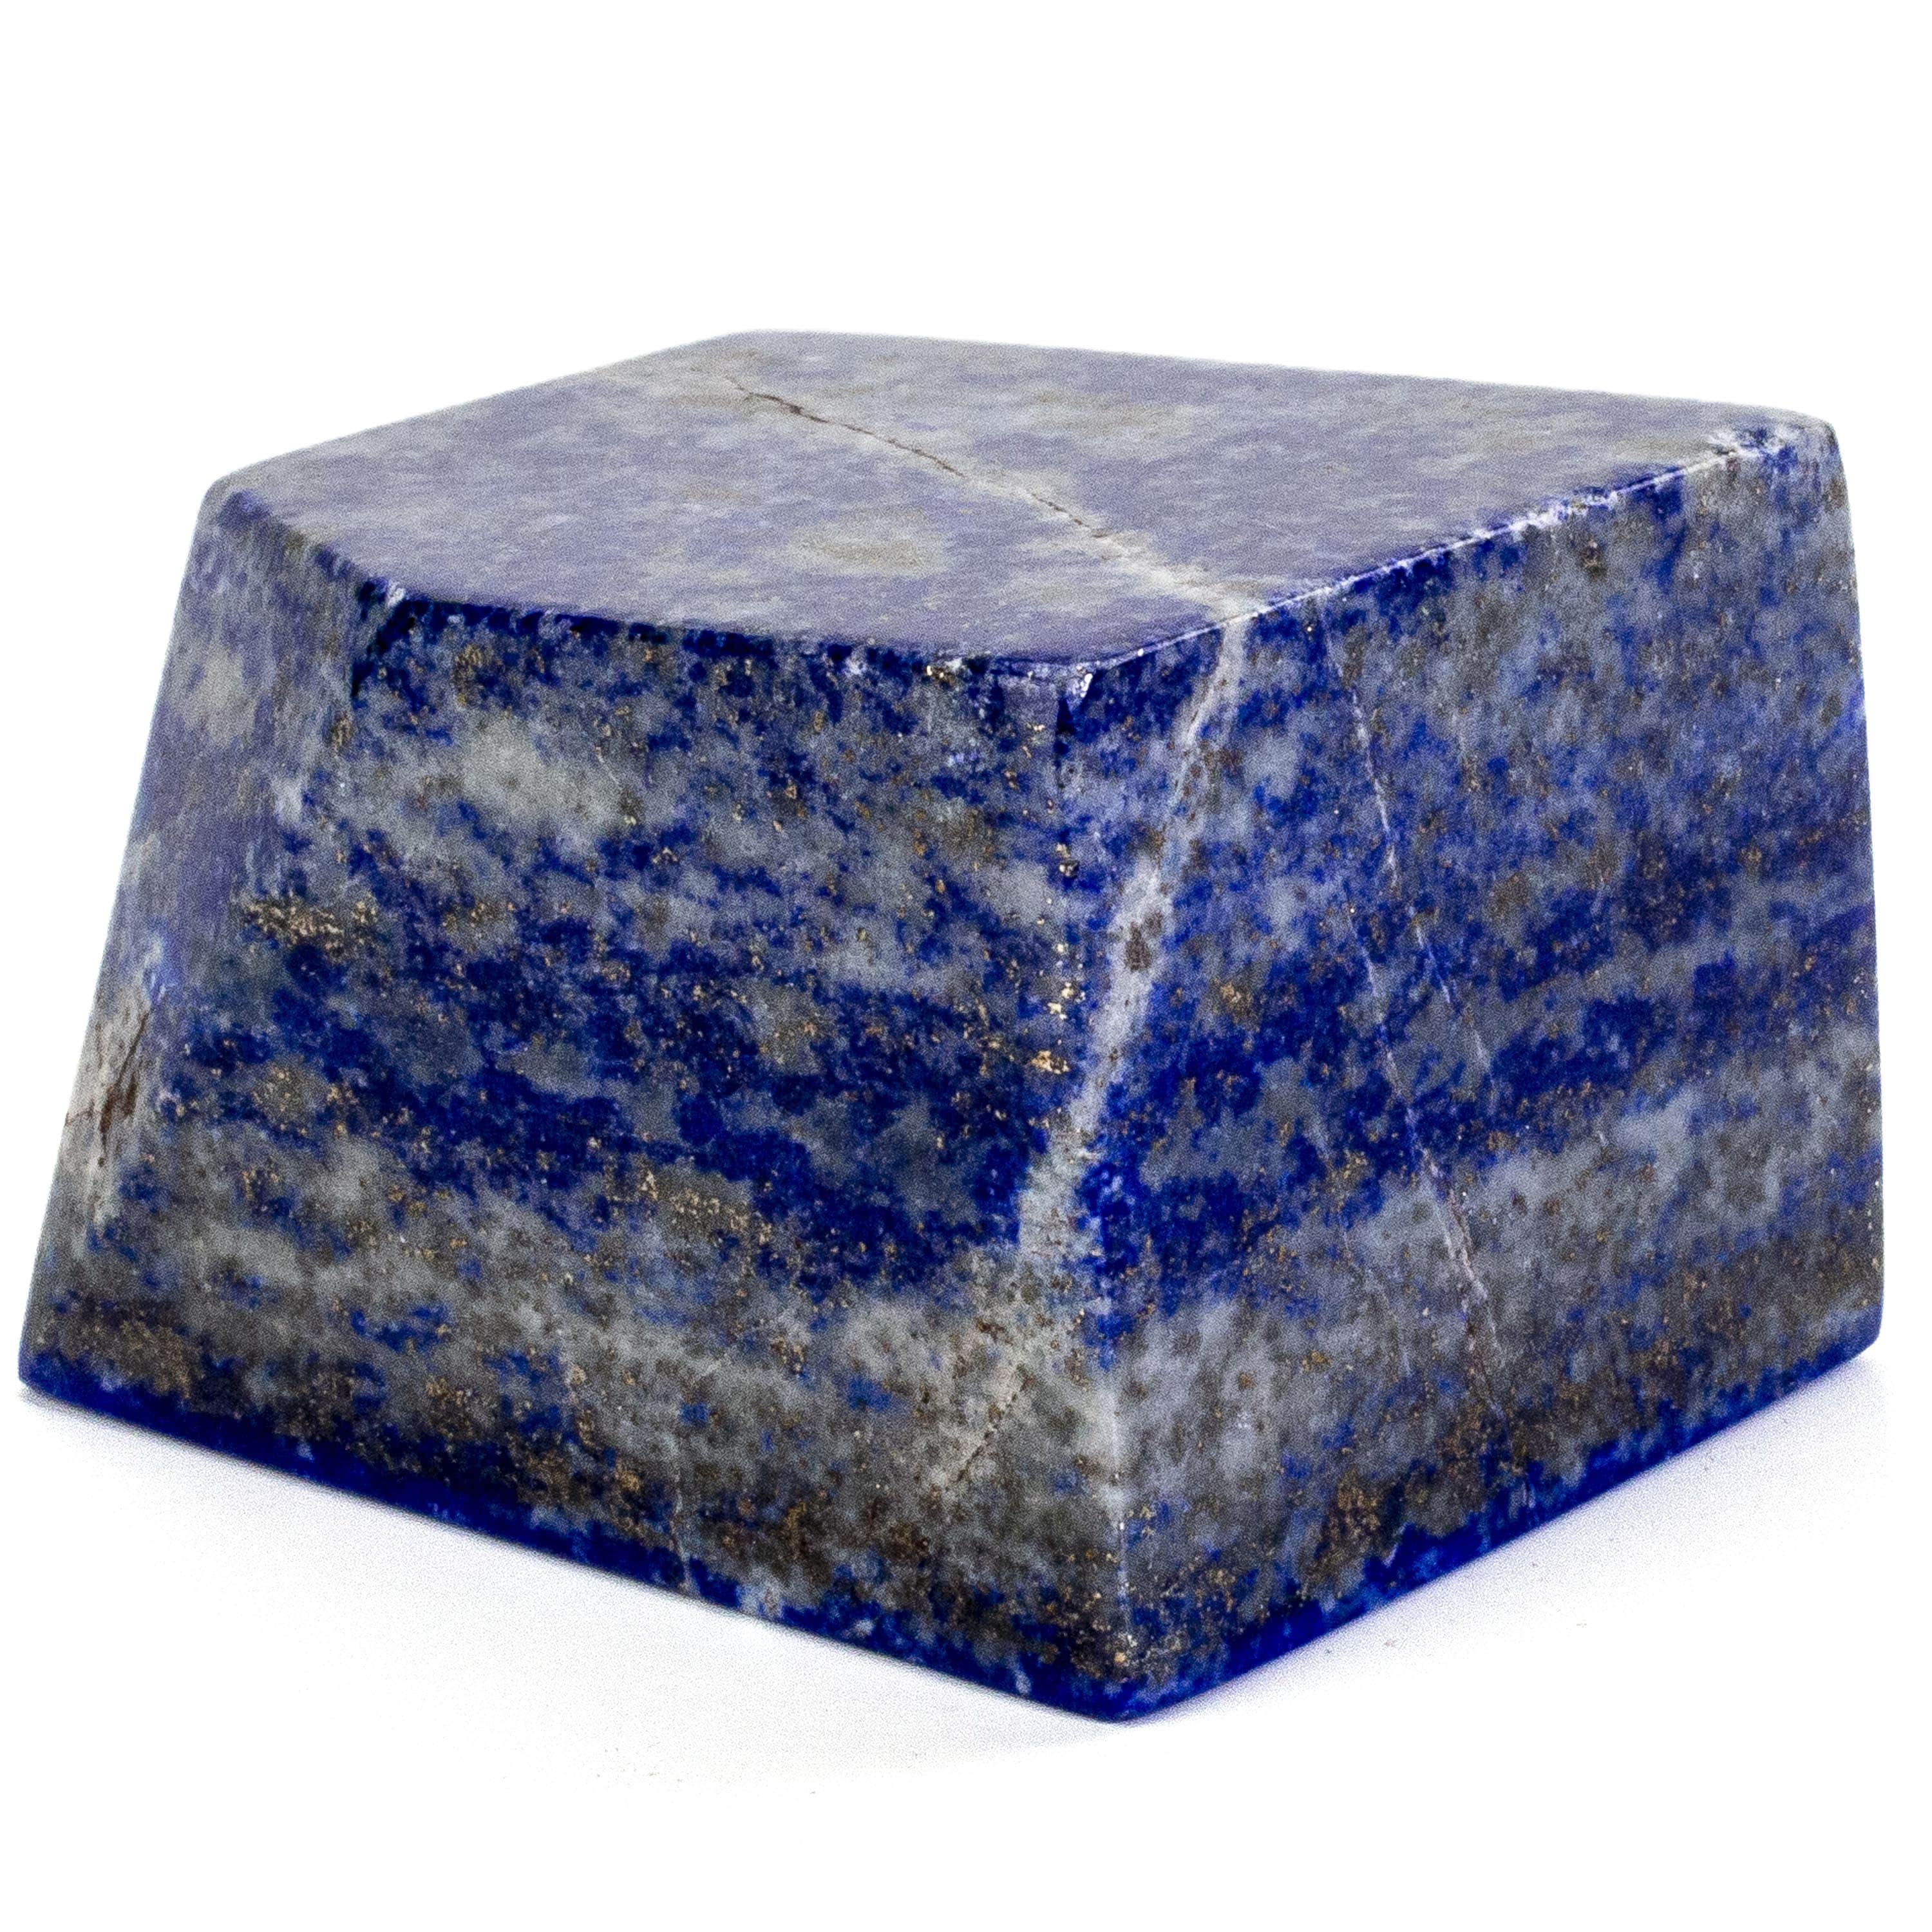 Kalifano Lapis Lapis Lazuil Freeform from Afghanistan - 290 g / 0.6 lbs LP400.010